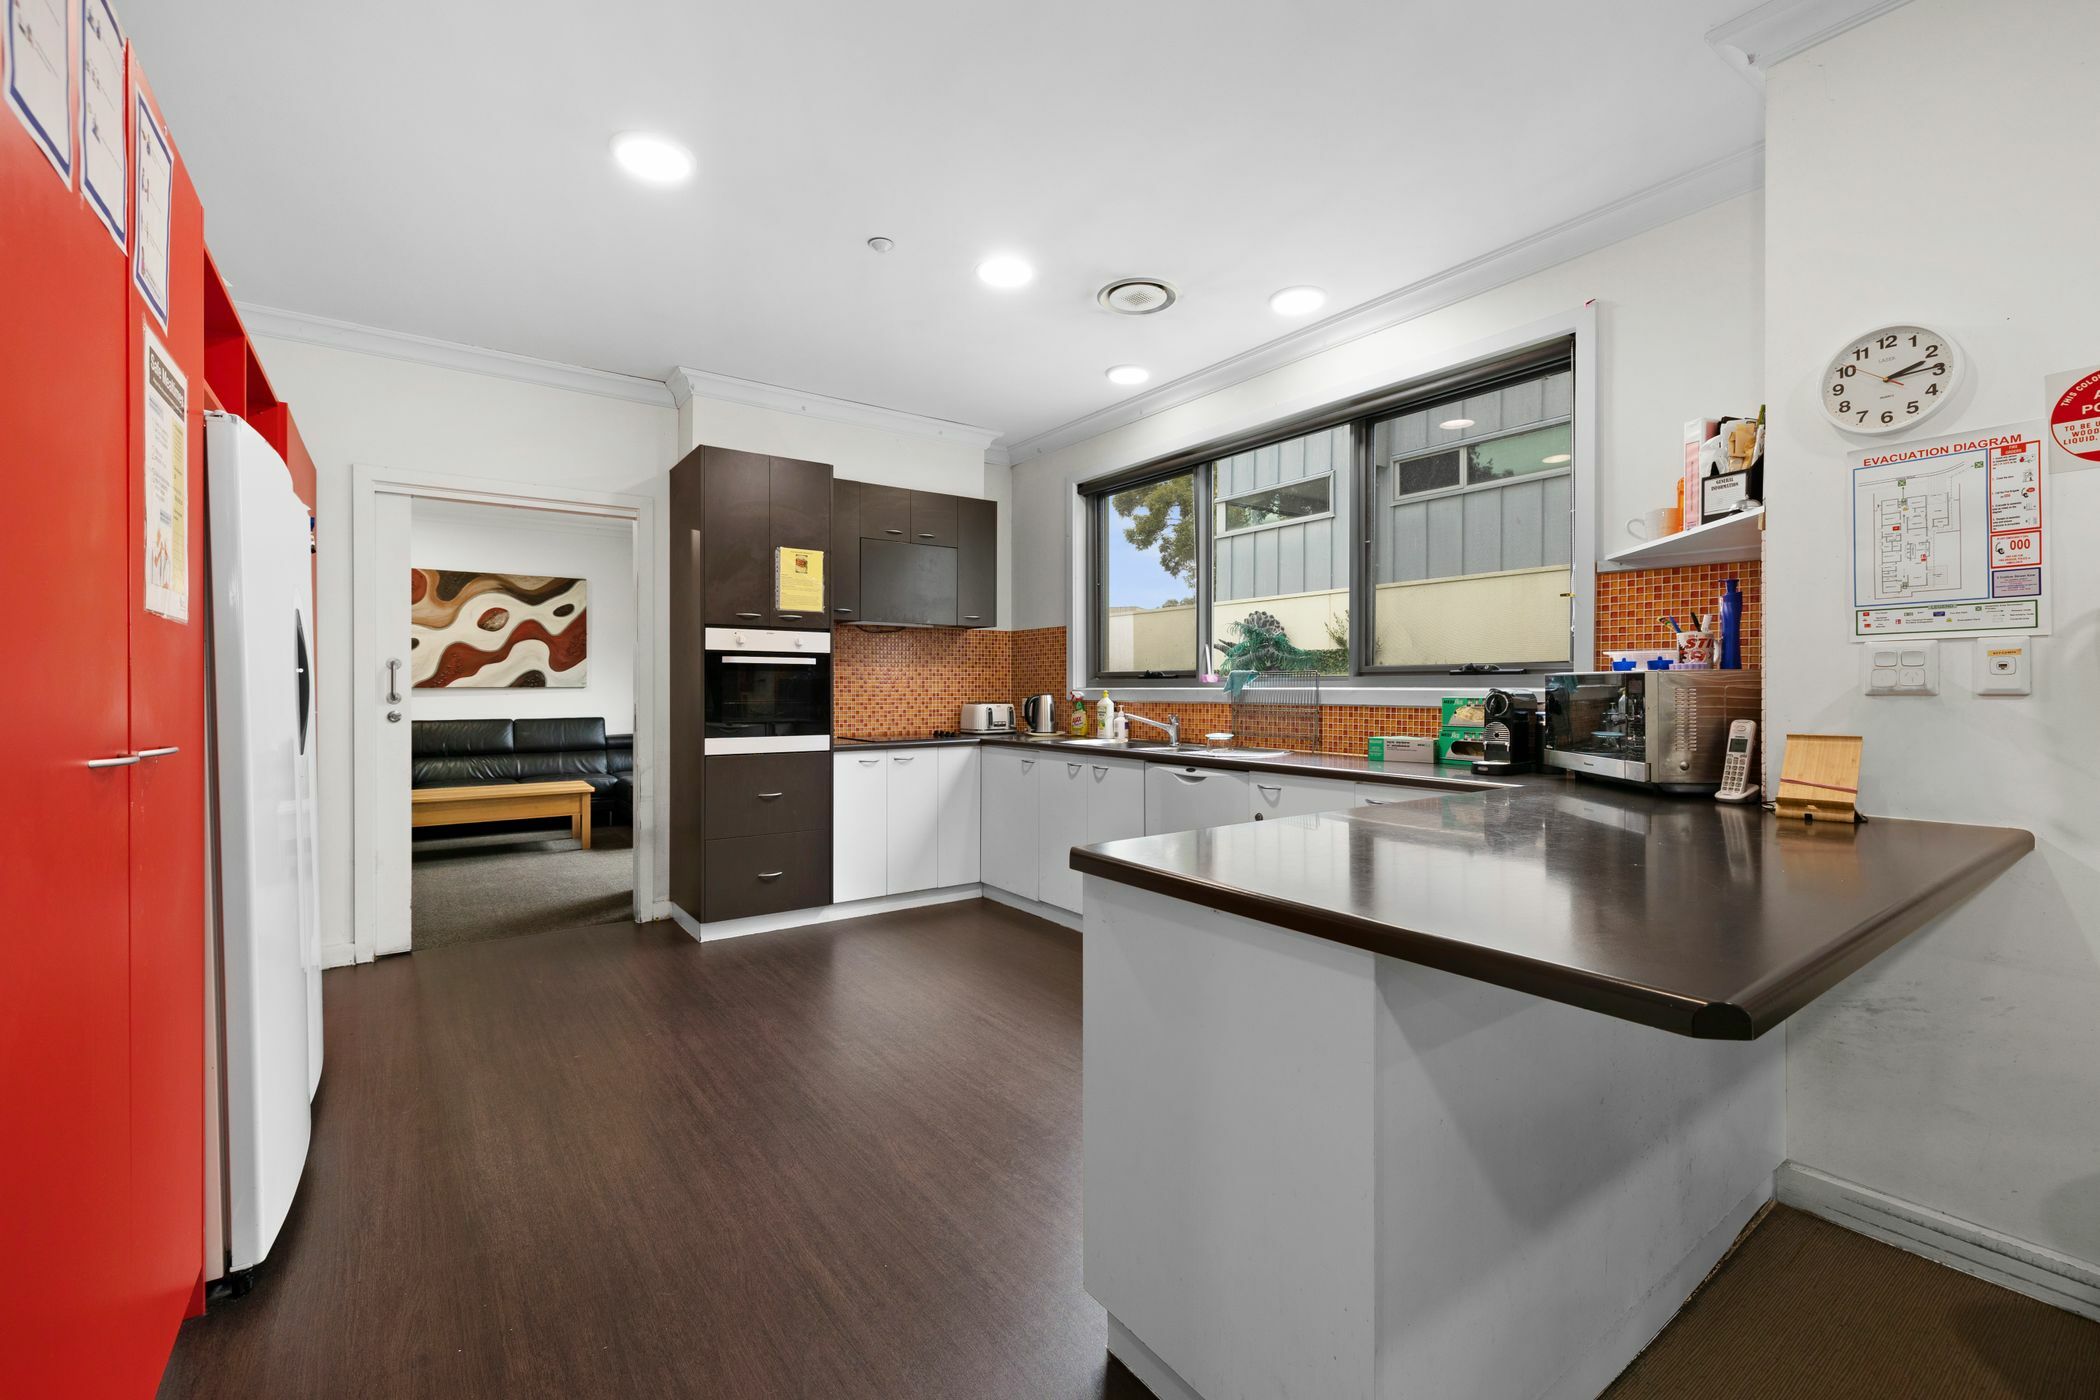 Kitchen area with brown stone benchtop